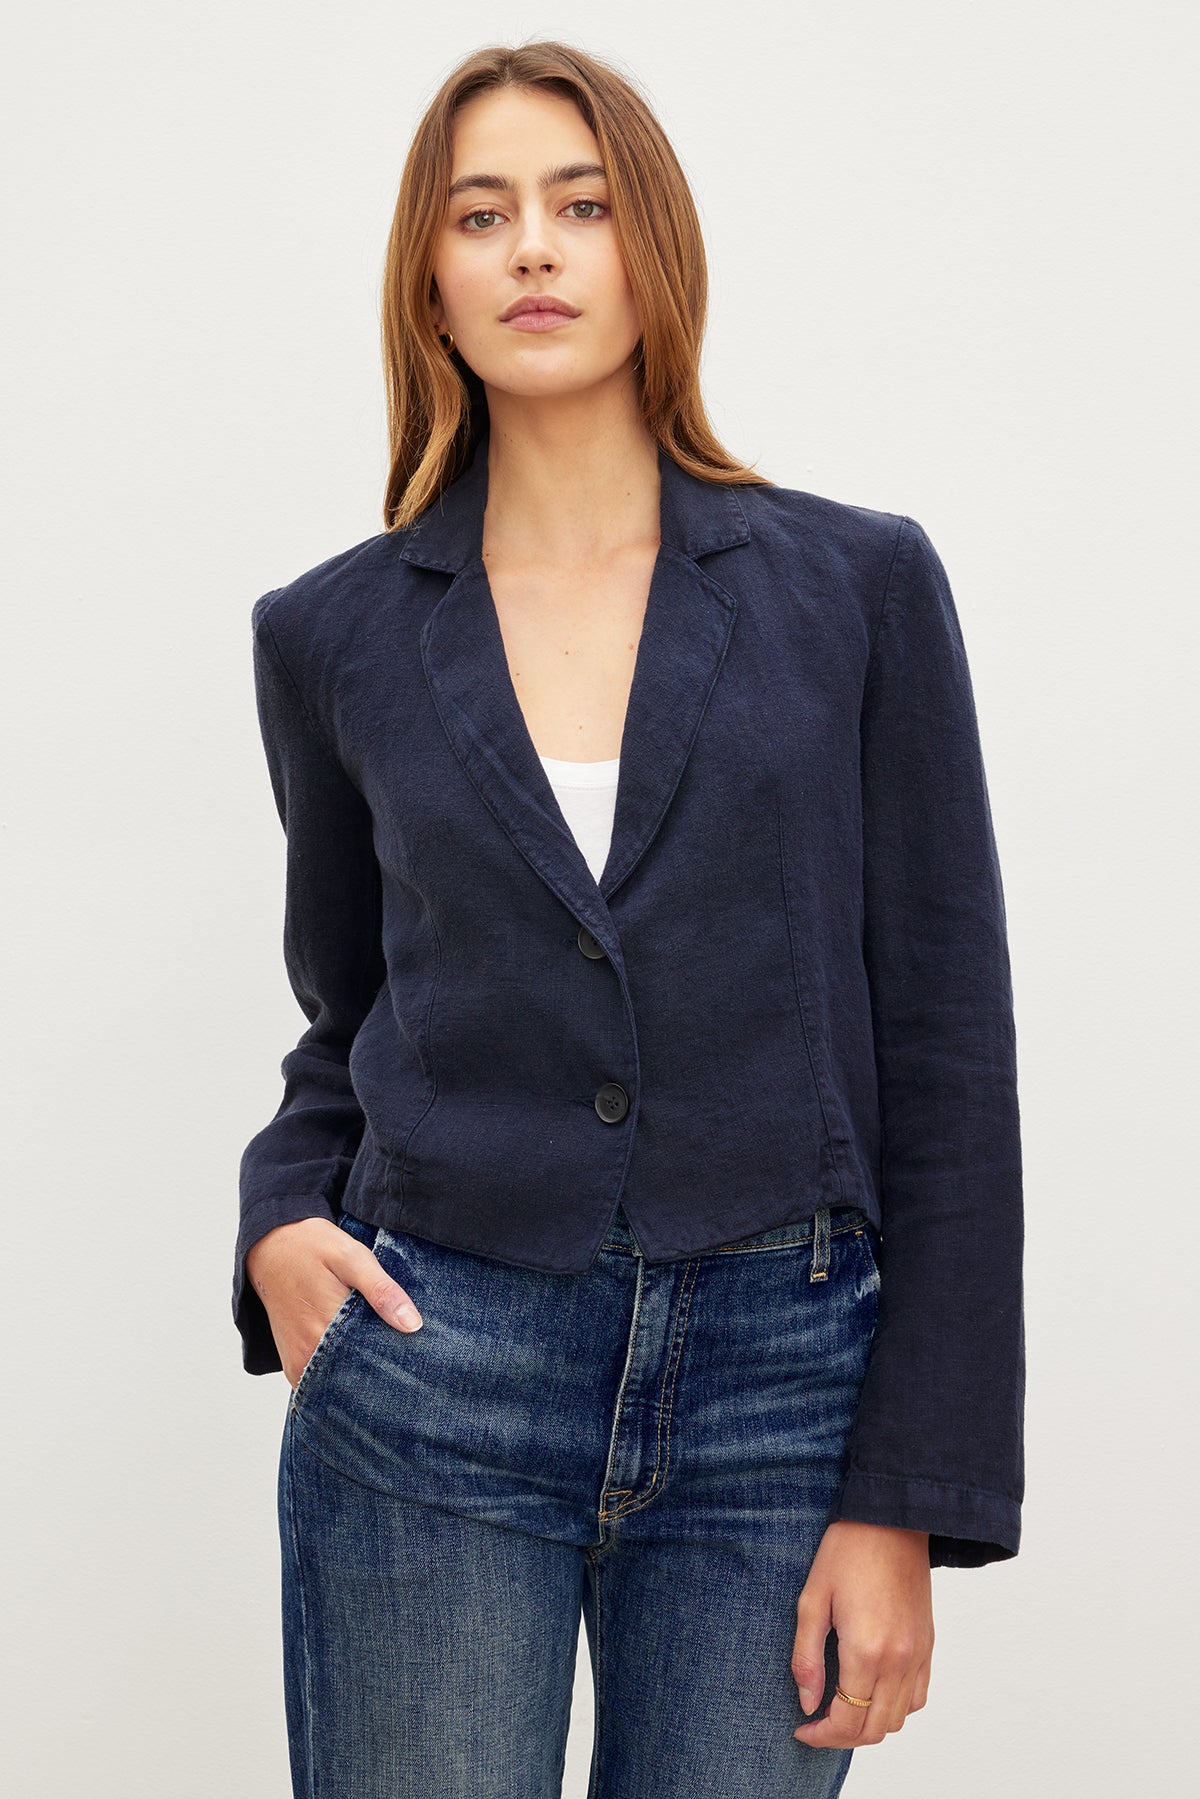 The model is wearing a blue Velvet by Graham & Spencer FINLEY HEAVY LINEN CROPPED BLAZER and jeans.-35982562623681